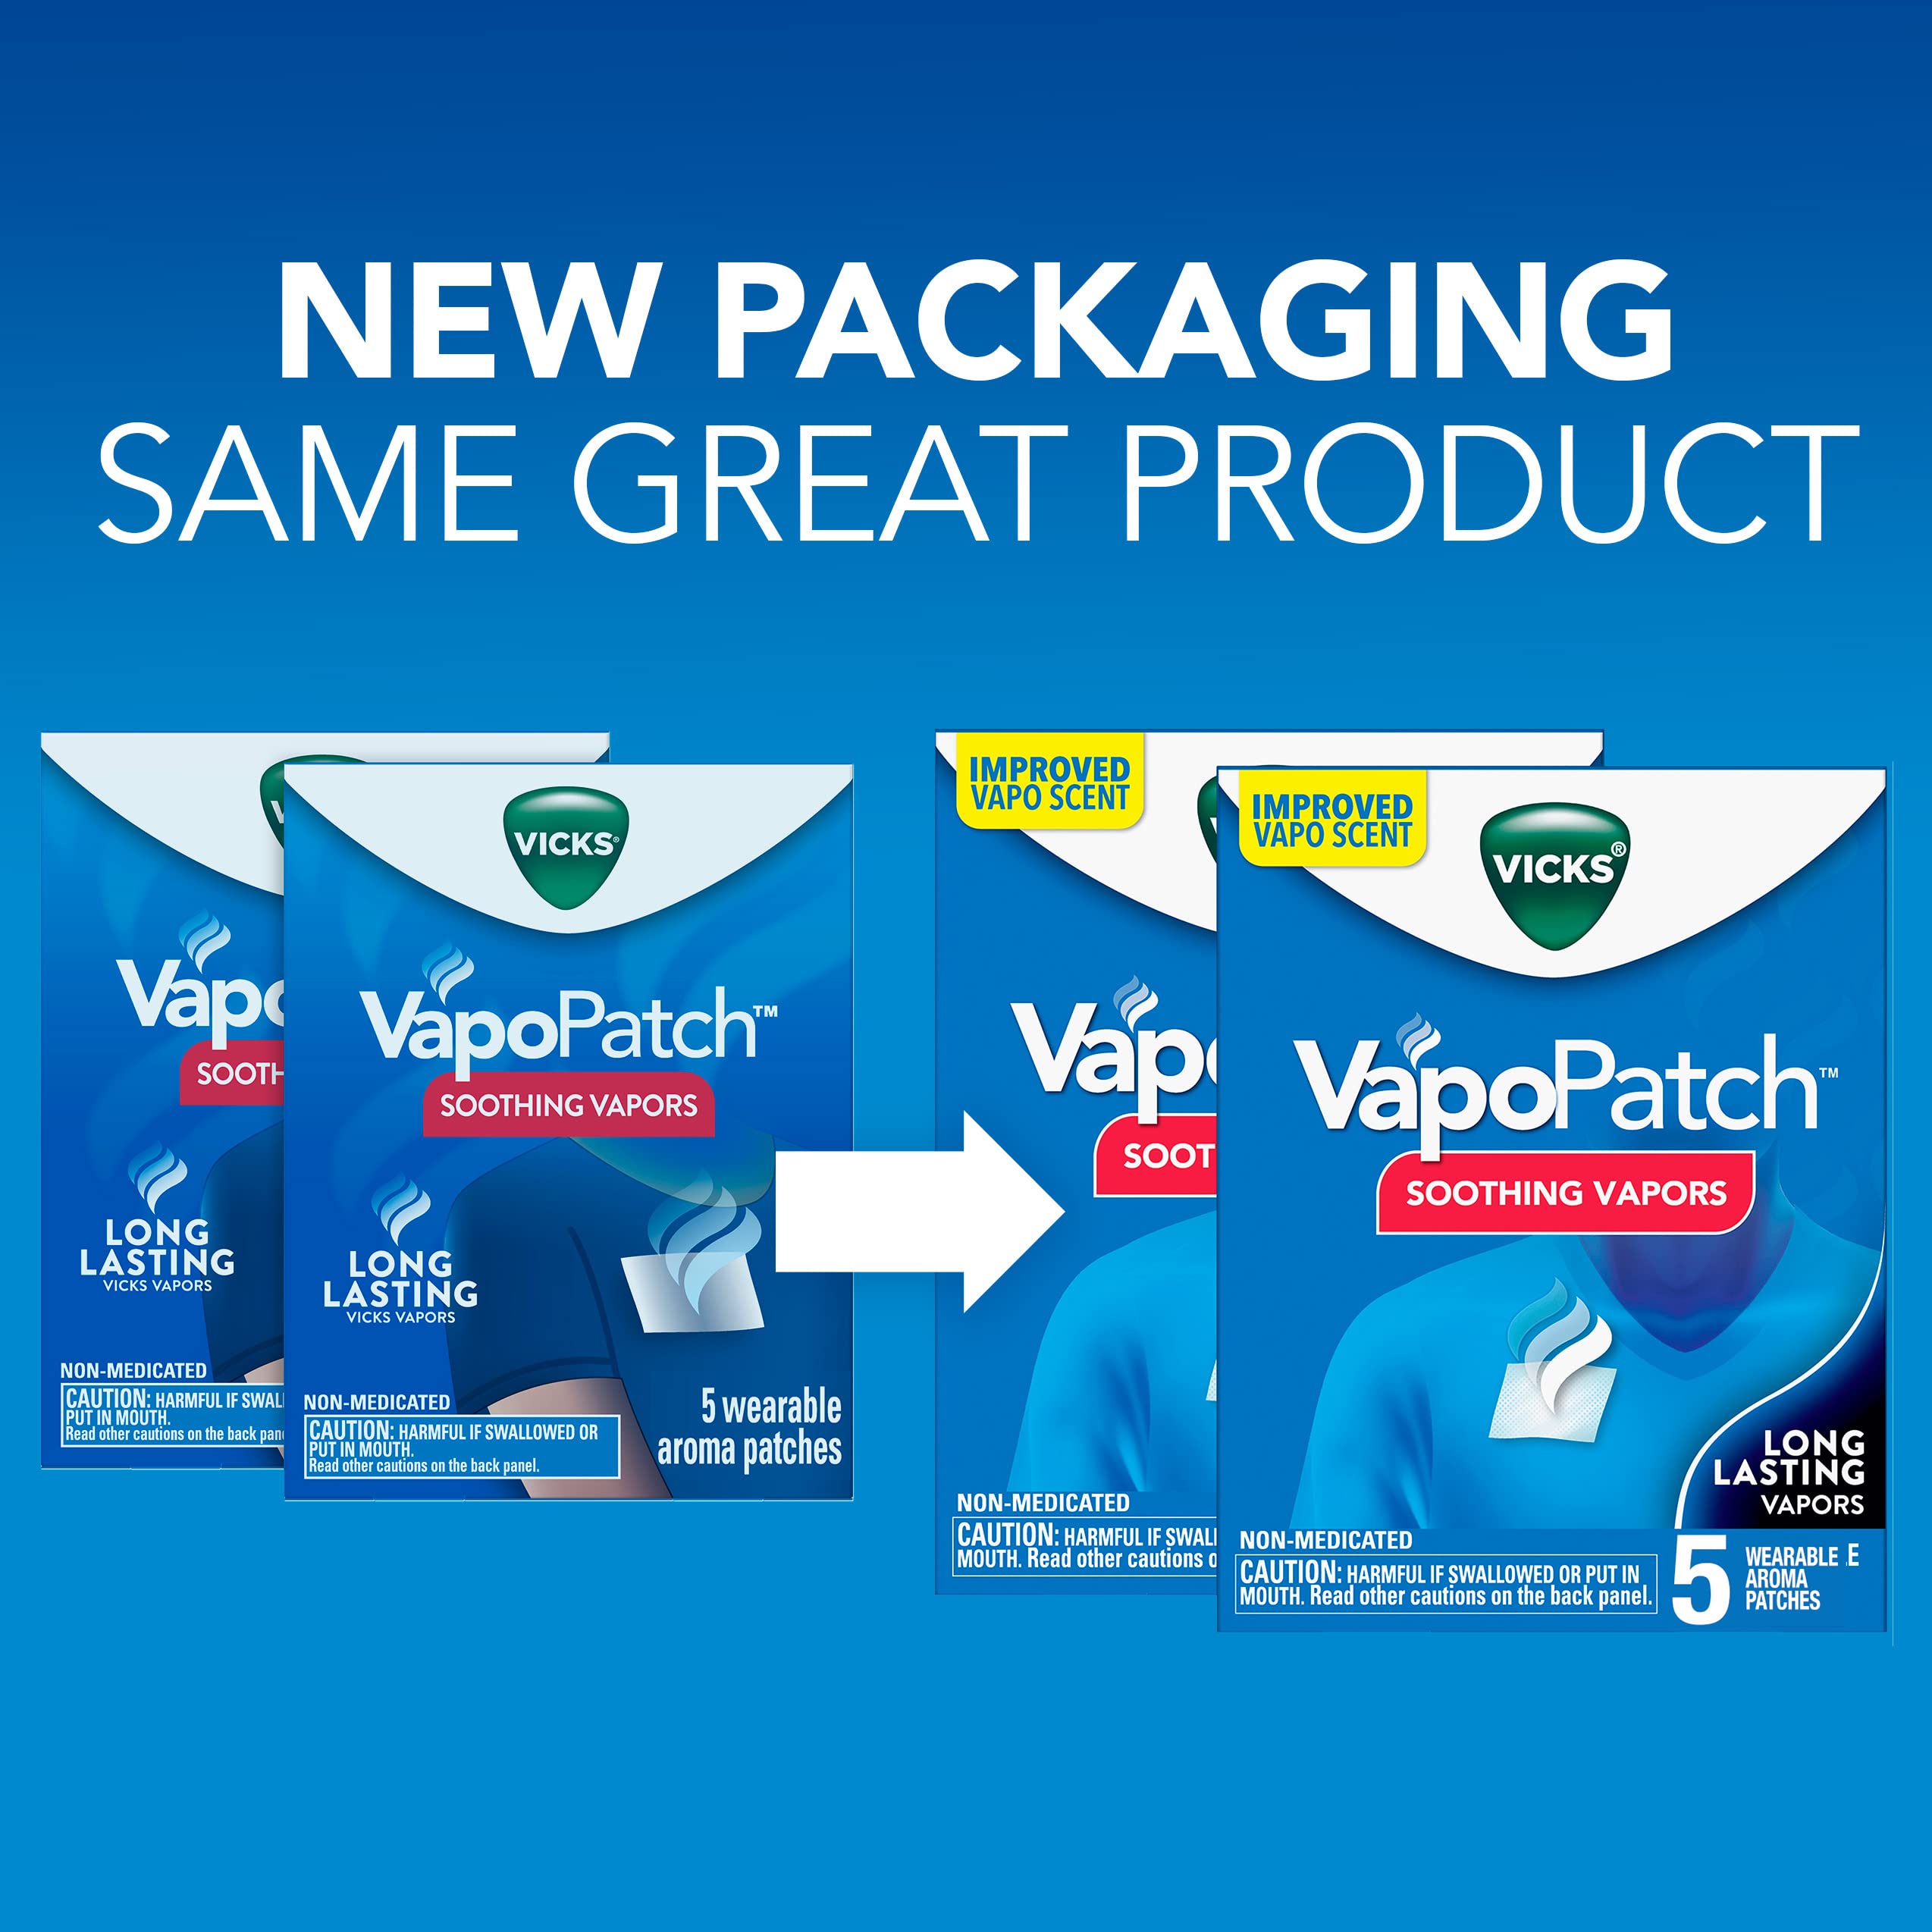 Vicks VapoPatch, Wearable Mess-Free Aroma Patch, Soothing & Comforting Non-Medicated Vicks Vapors, For Adults & Children Ages 6+, 5ct (2 pack)